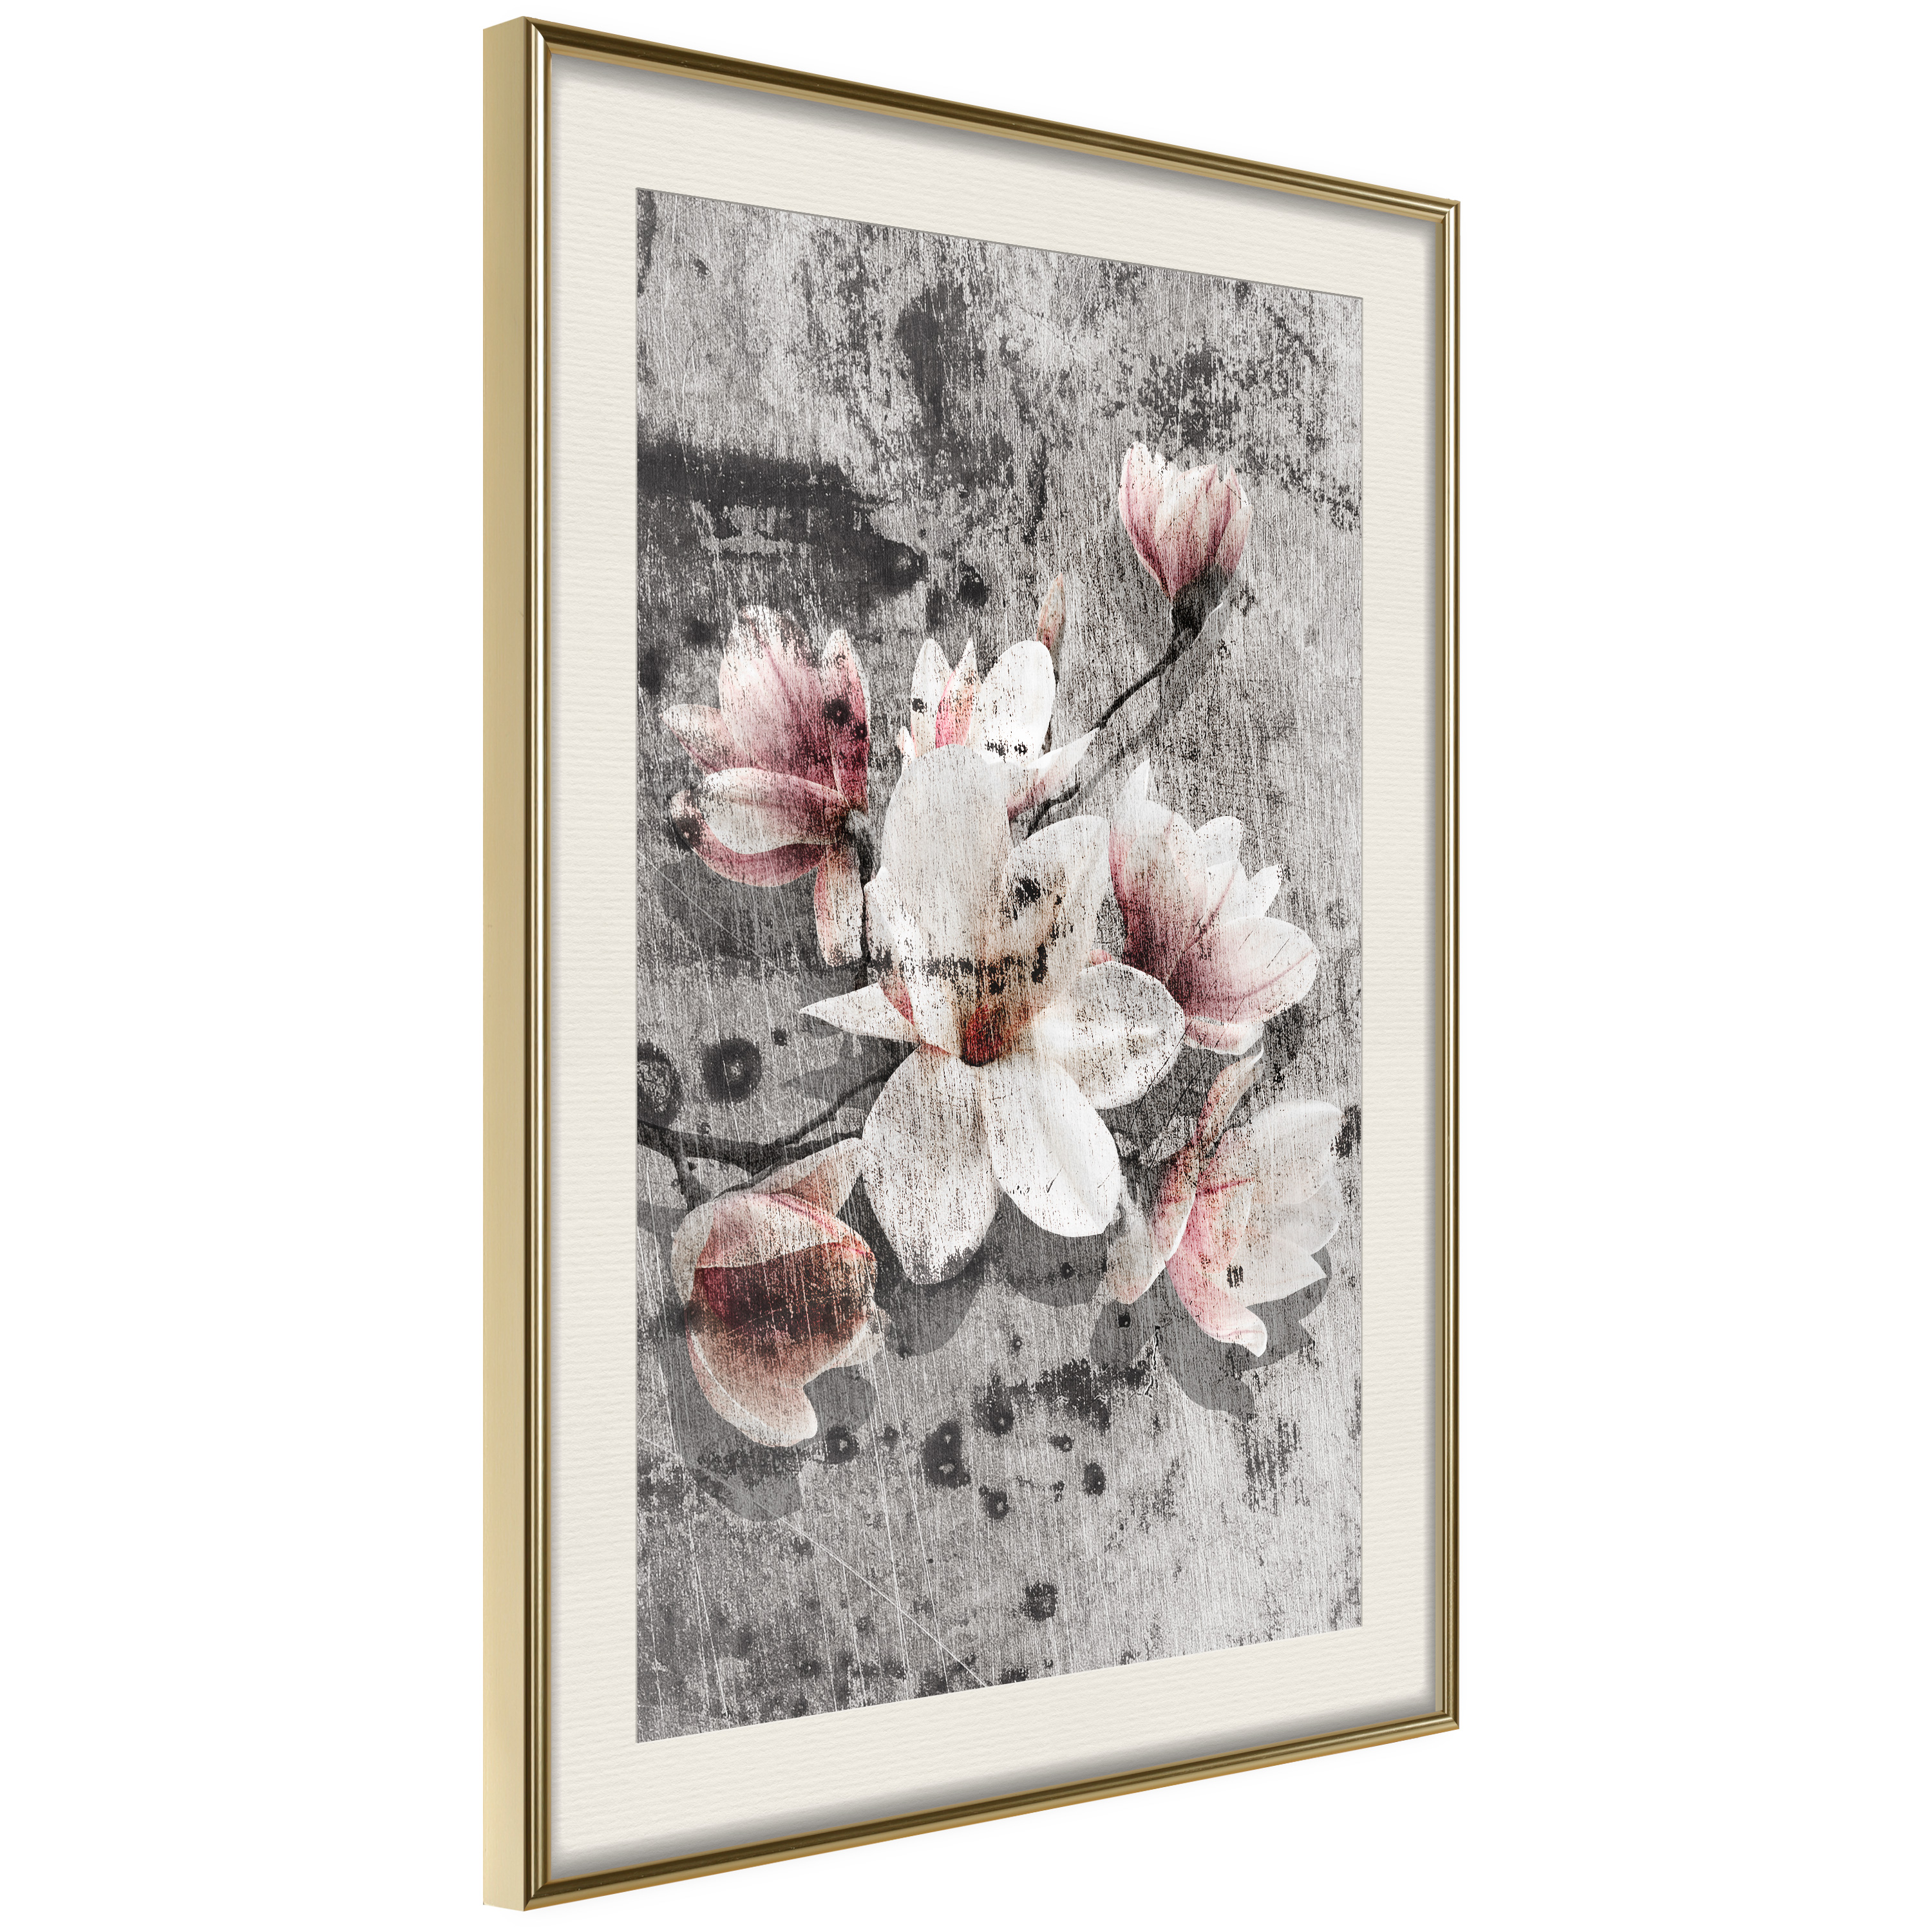 Poster - Flowers on Concrete - 20x30